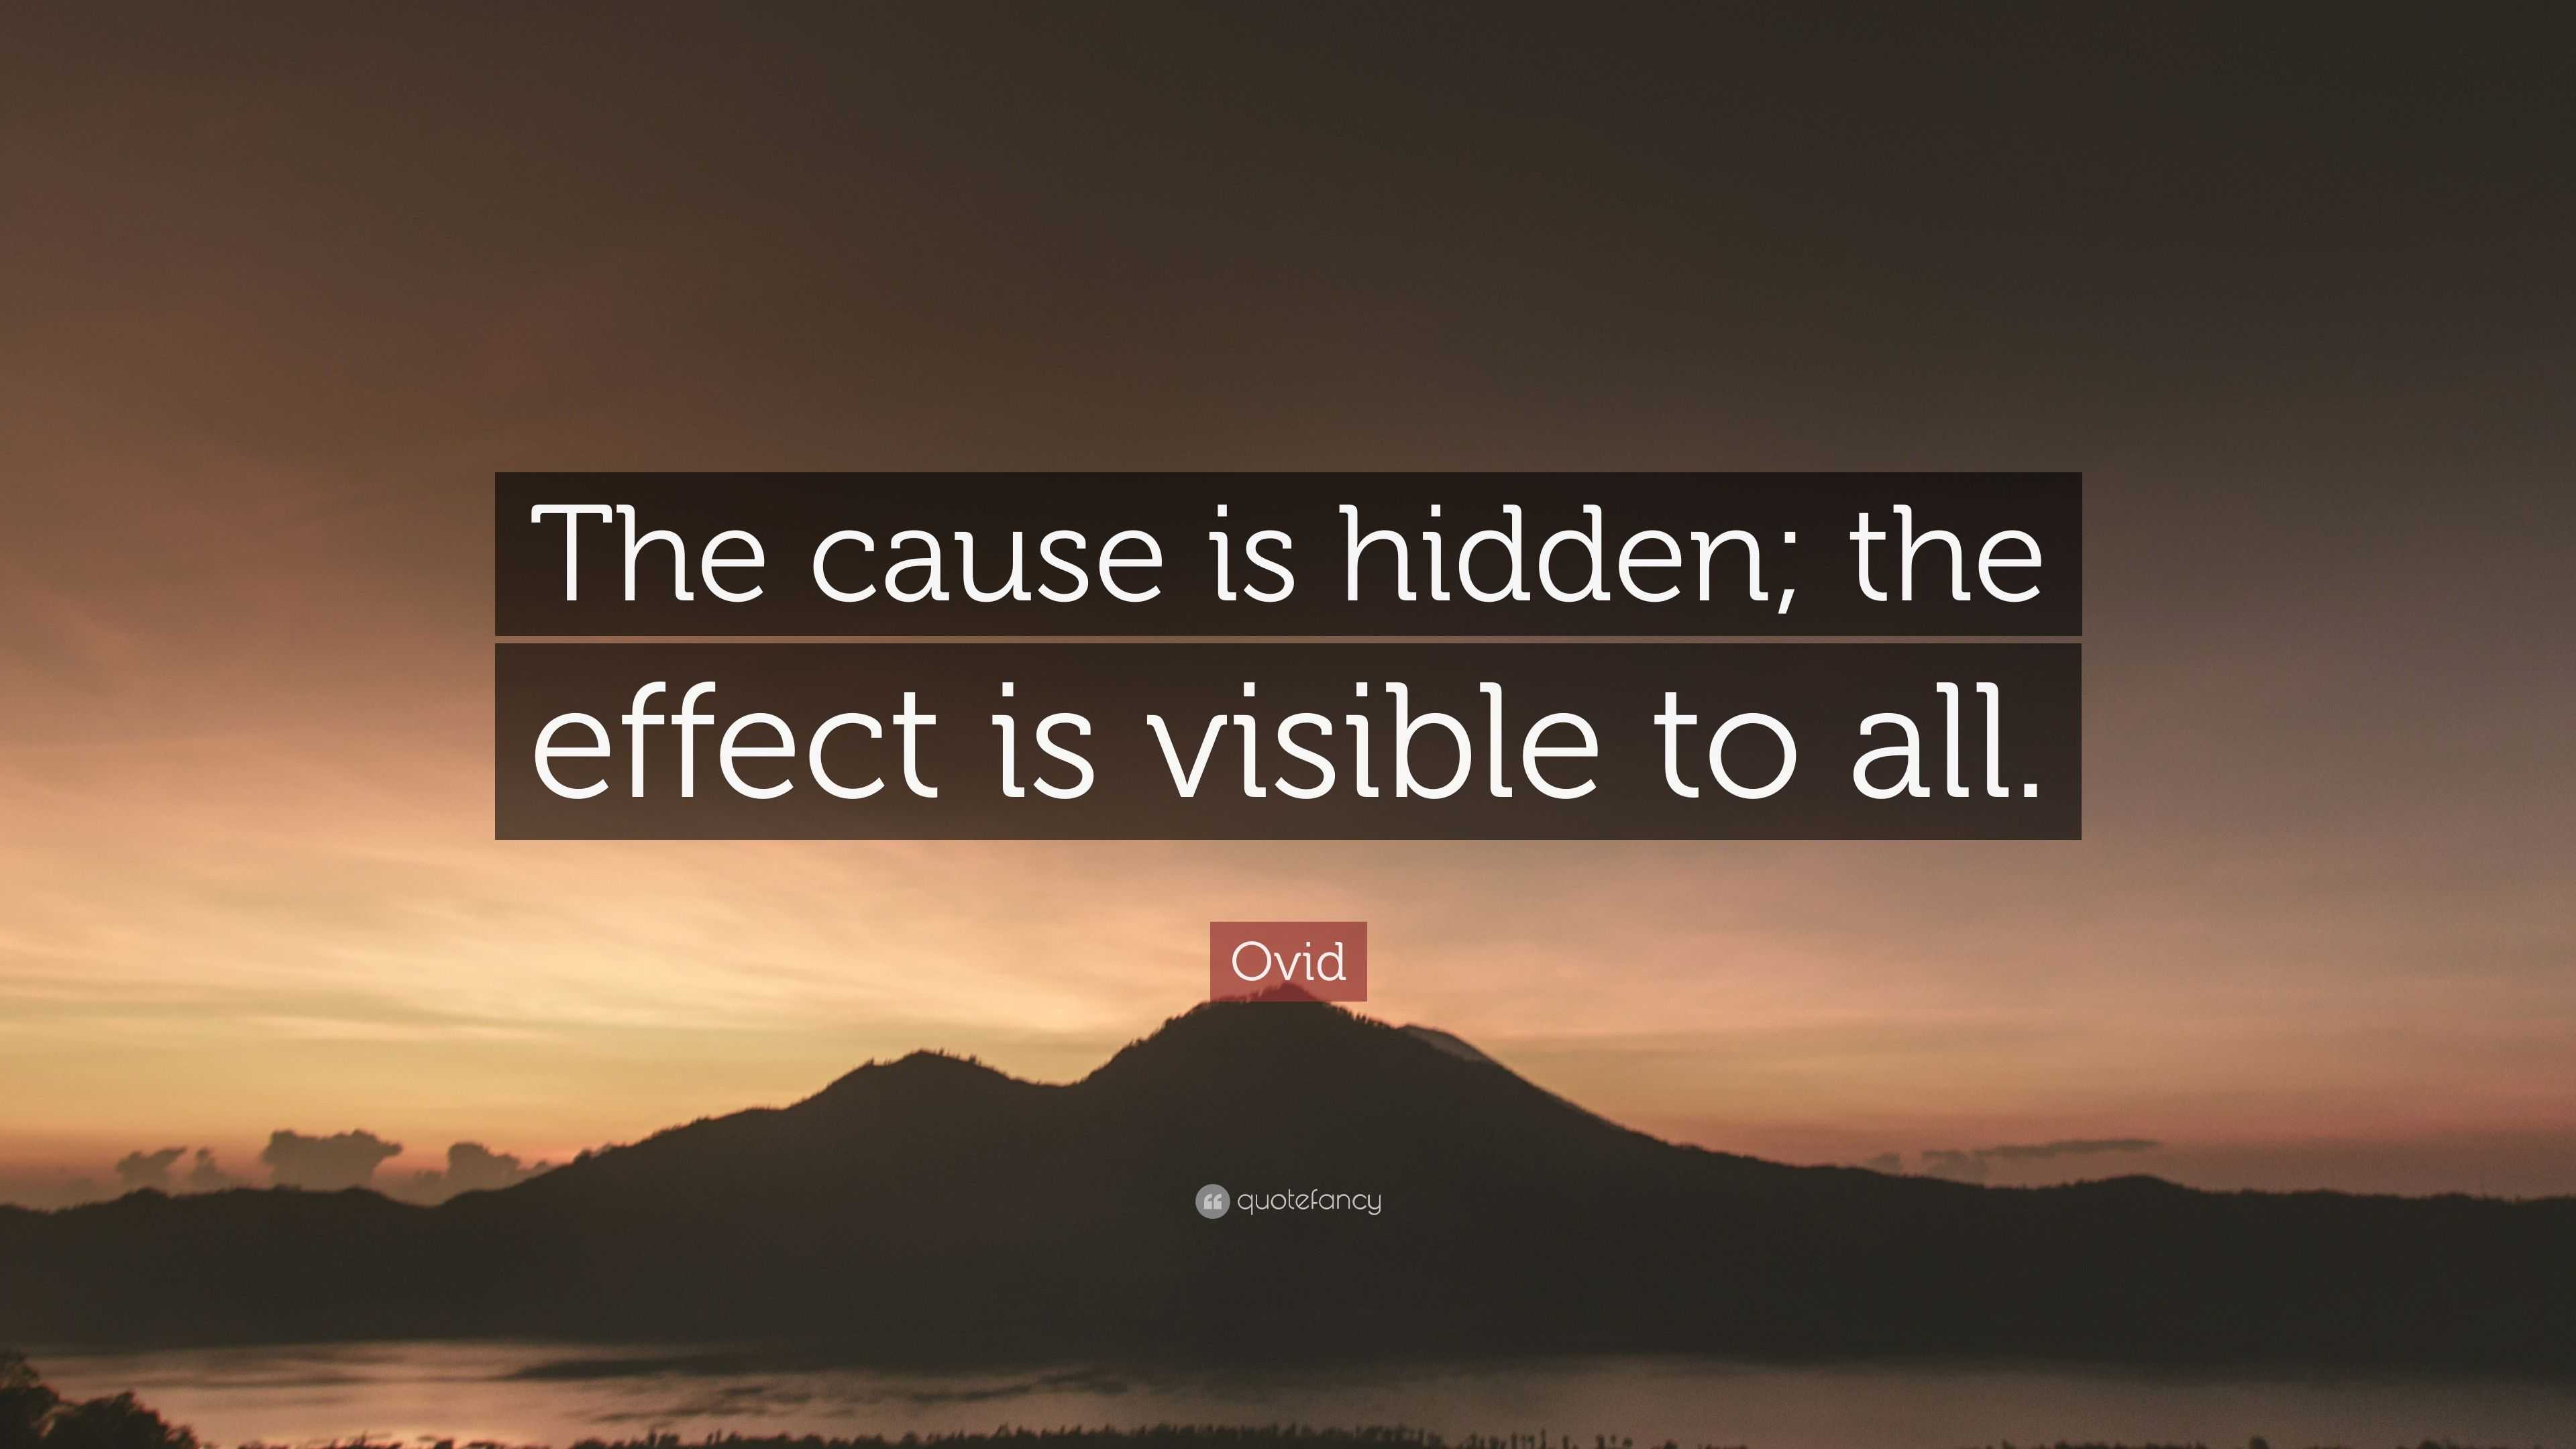 Ovid Quote “The cause is hidden; the effect is visible to all.”